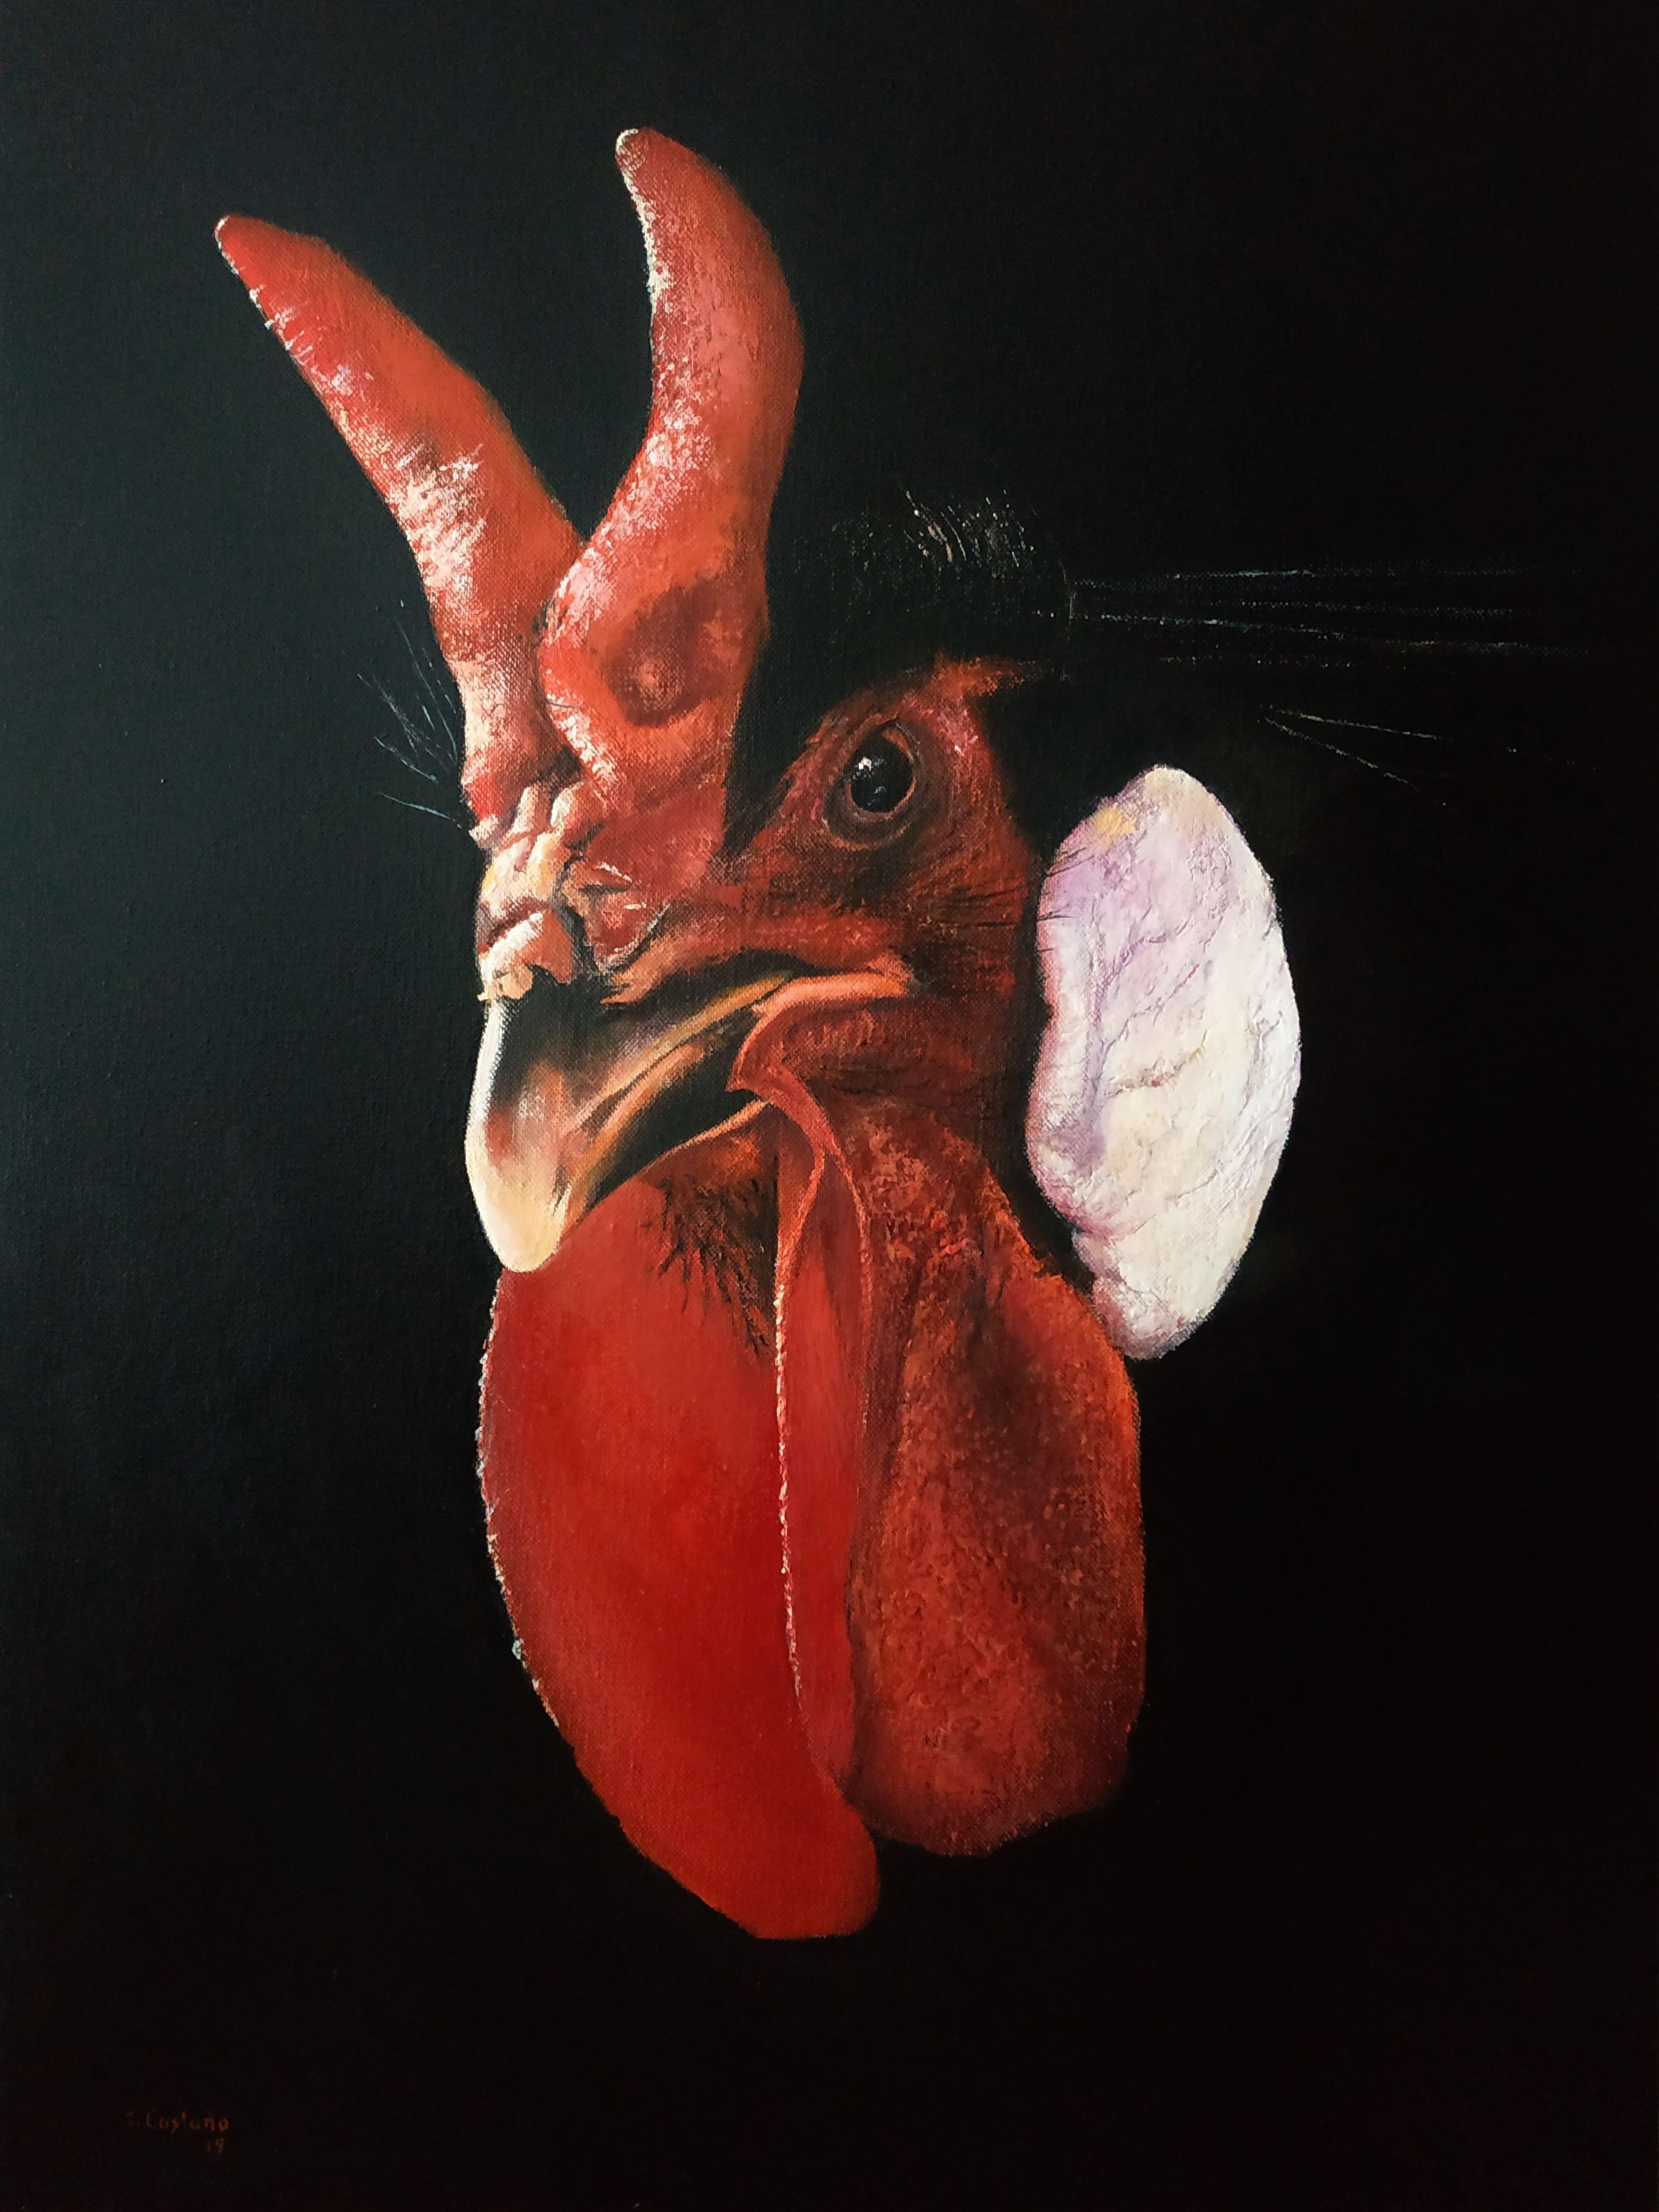 Exotic species of hen that is characterized by its crest in the form of horns. :: Painting :: Realism :: This piece comes with an official certificate of authenticity signed by the artist :: Ready to Hang: Yes :: Signed: Yes :: Signature Location: